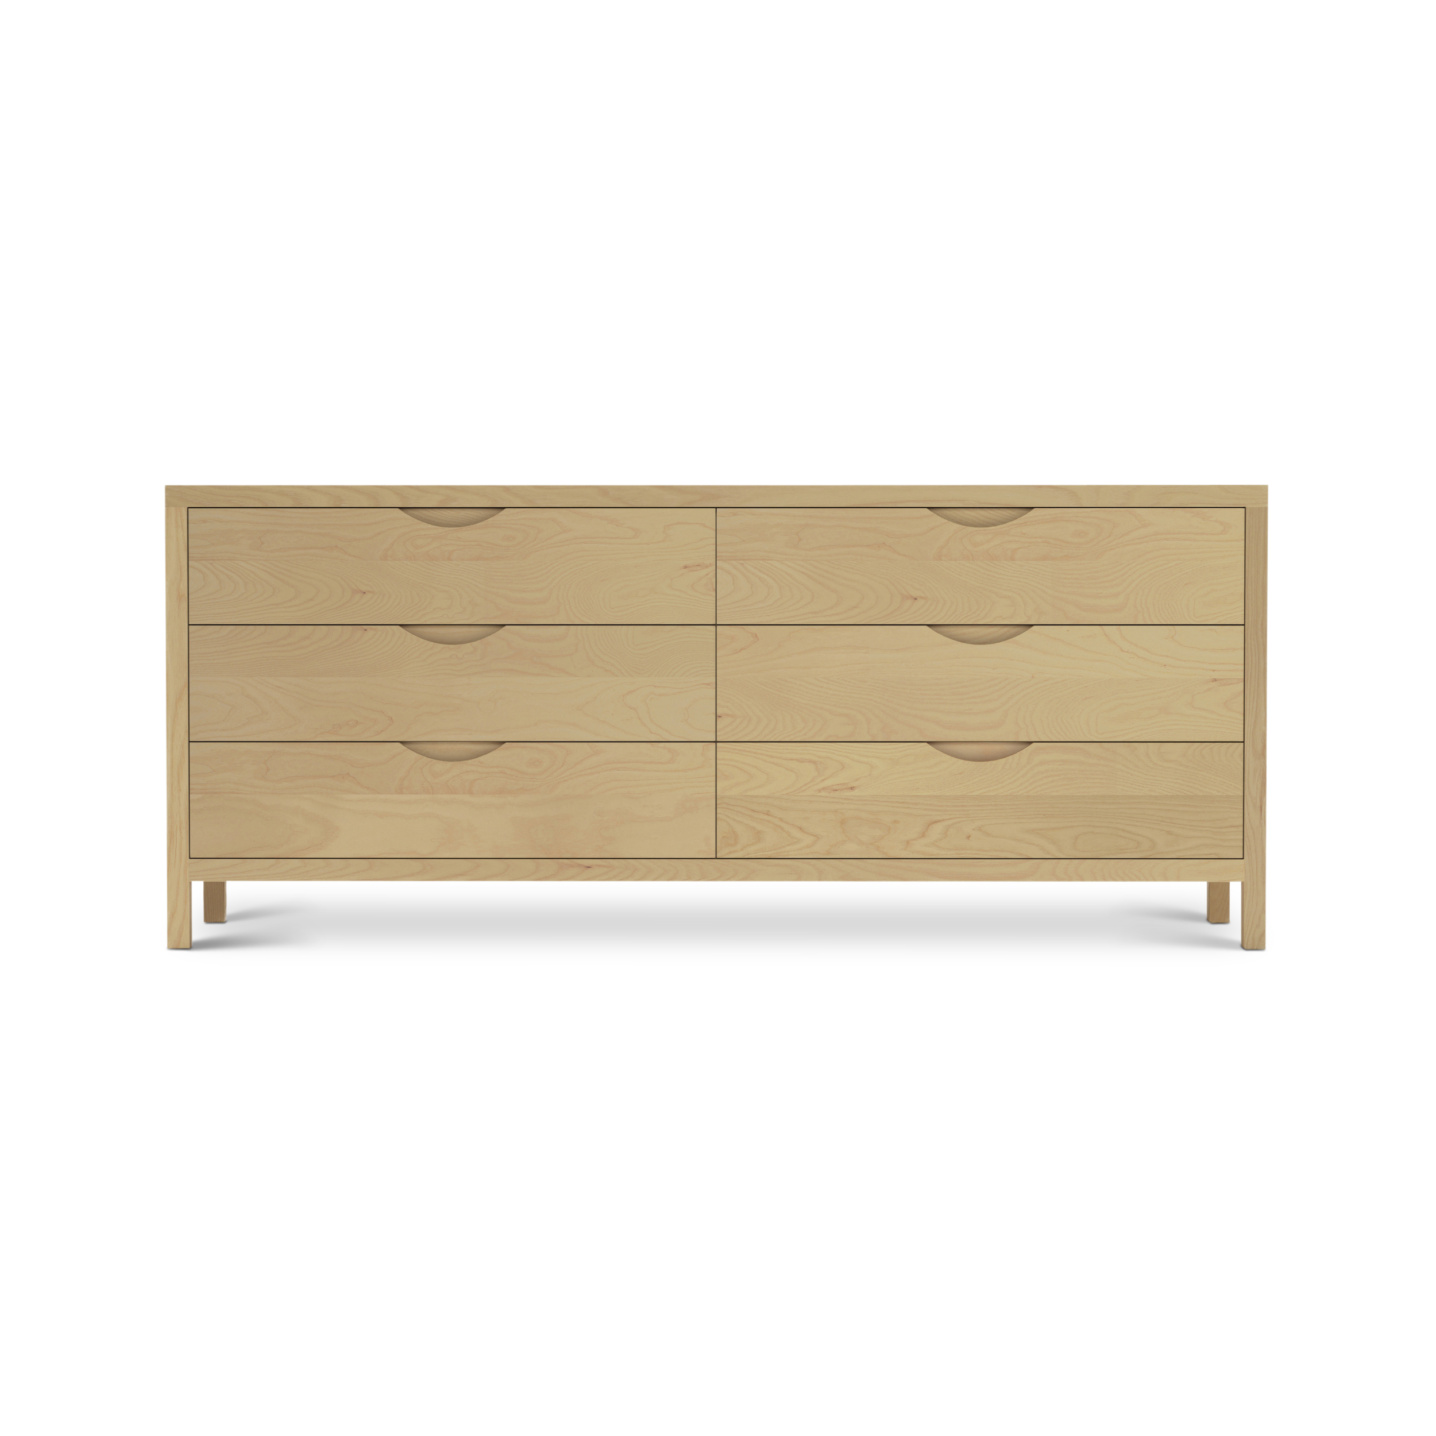 Solid ash Danish dresser with integrated handles